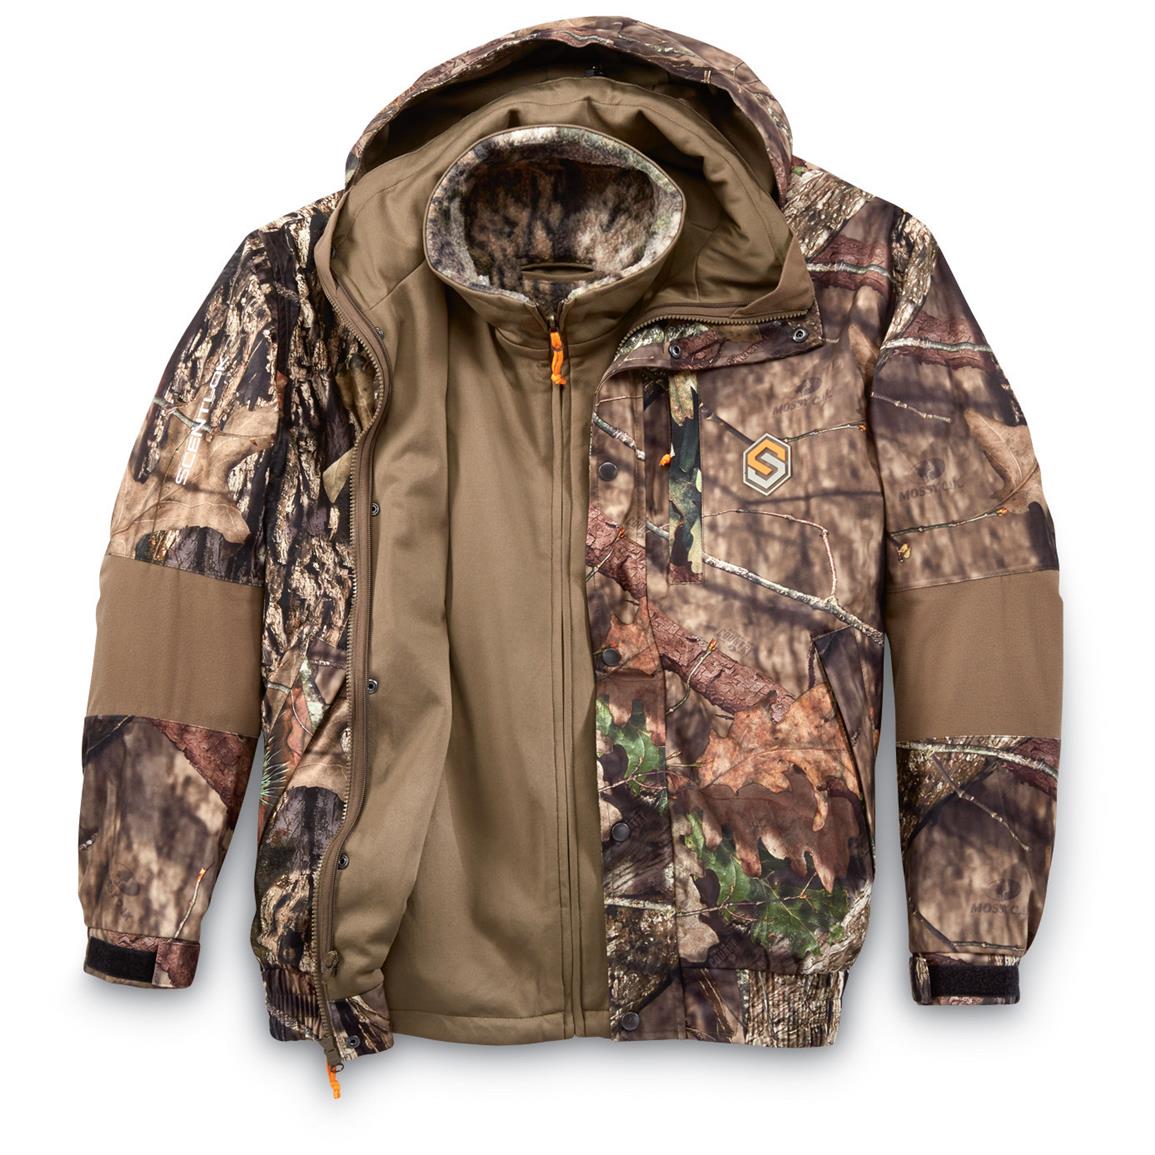 ScentLok Men's Cold Blooded 3-In-1 Hunting Jacket - 675943, Camo ...